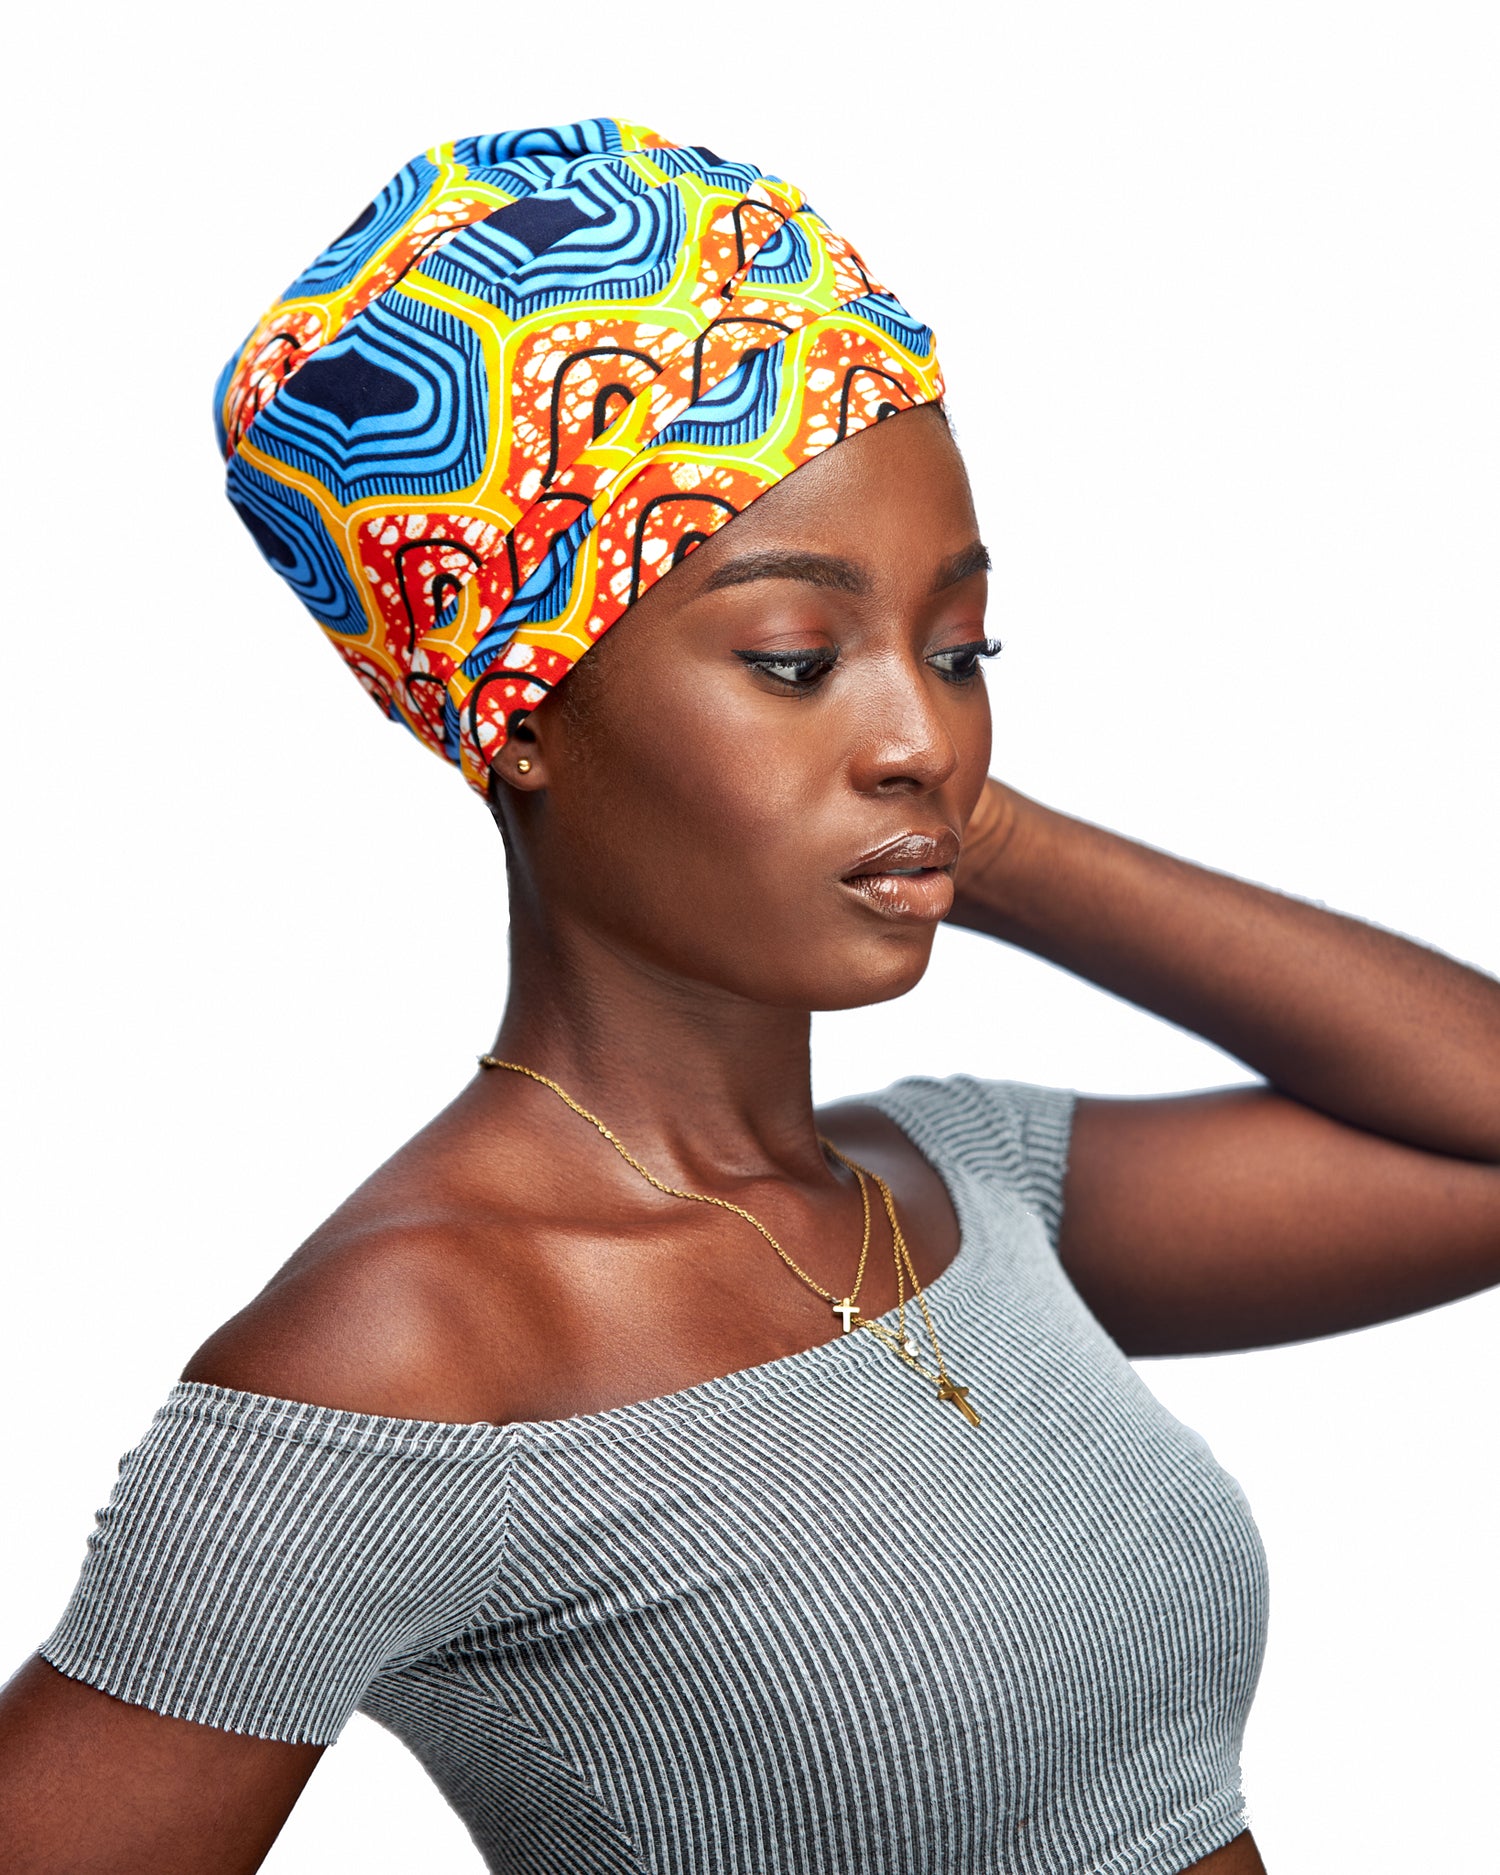 Ankara Wax Print Made of Seablue, Orange, Yellow, White And Black Blend of Beautiful Colours And Pattern, Hand Made Elastic Silklined Bonnet With Band